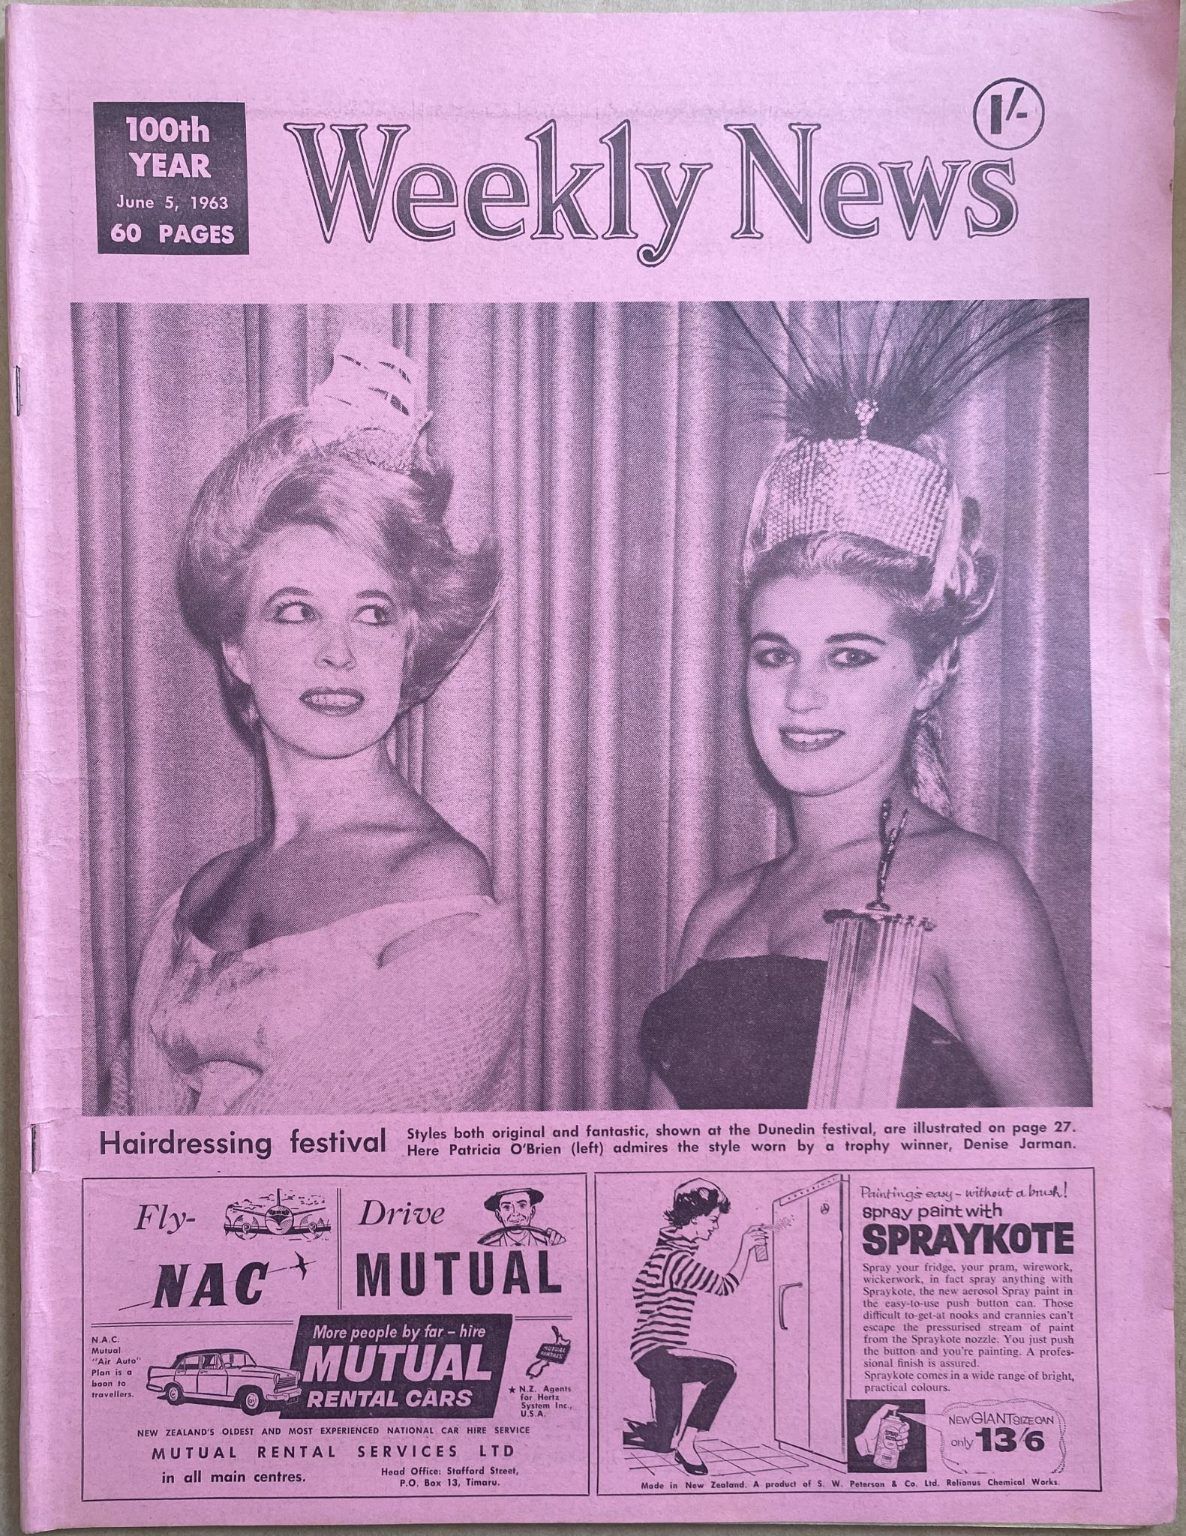 OLD NEWSPAPER: The Weekly News, No. 5193, 5 June 1963